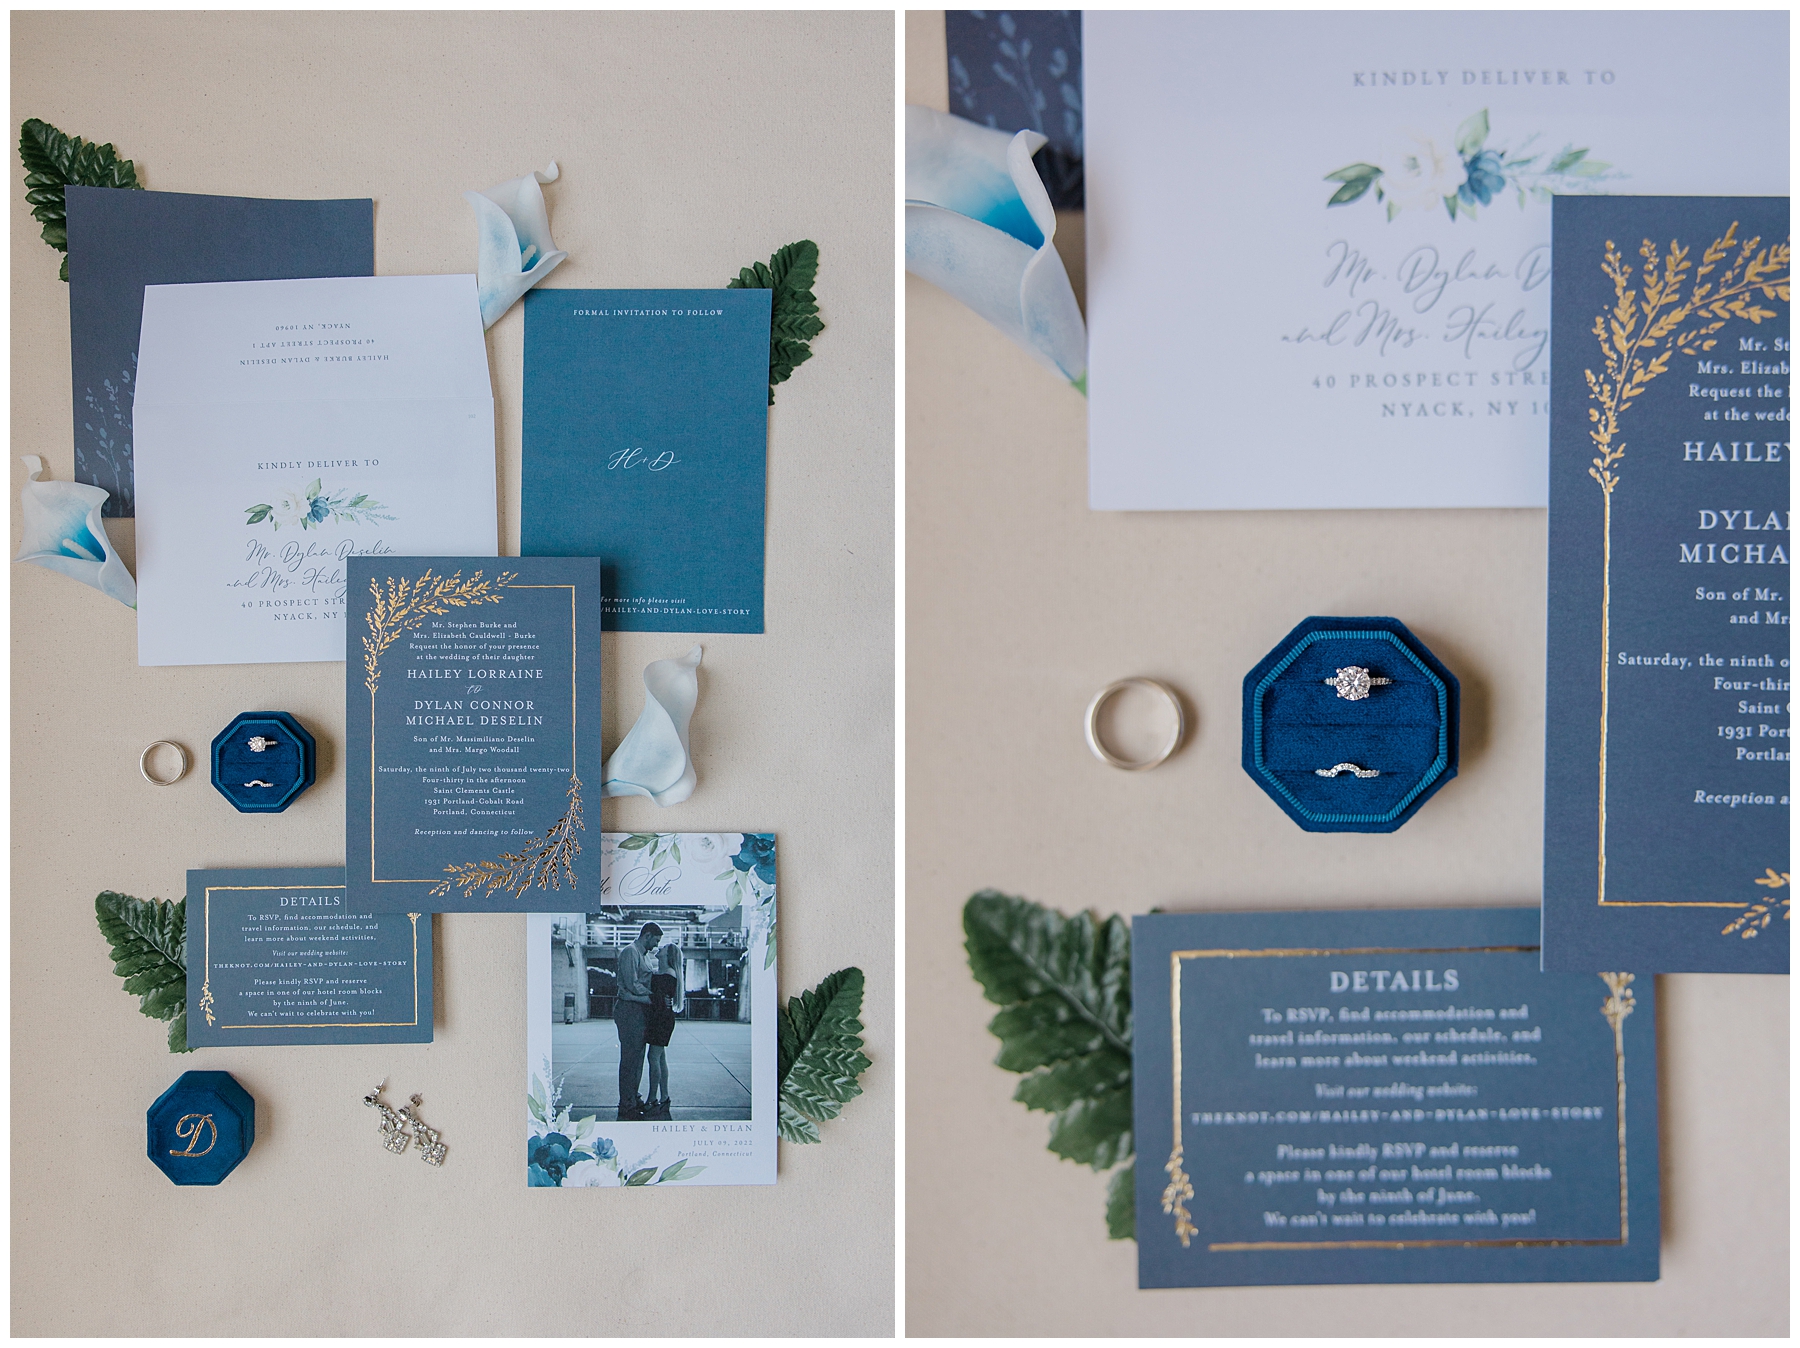 wedding invitations and details from Saint Clements Castle Fairytale Wedding in Connecticut